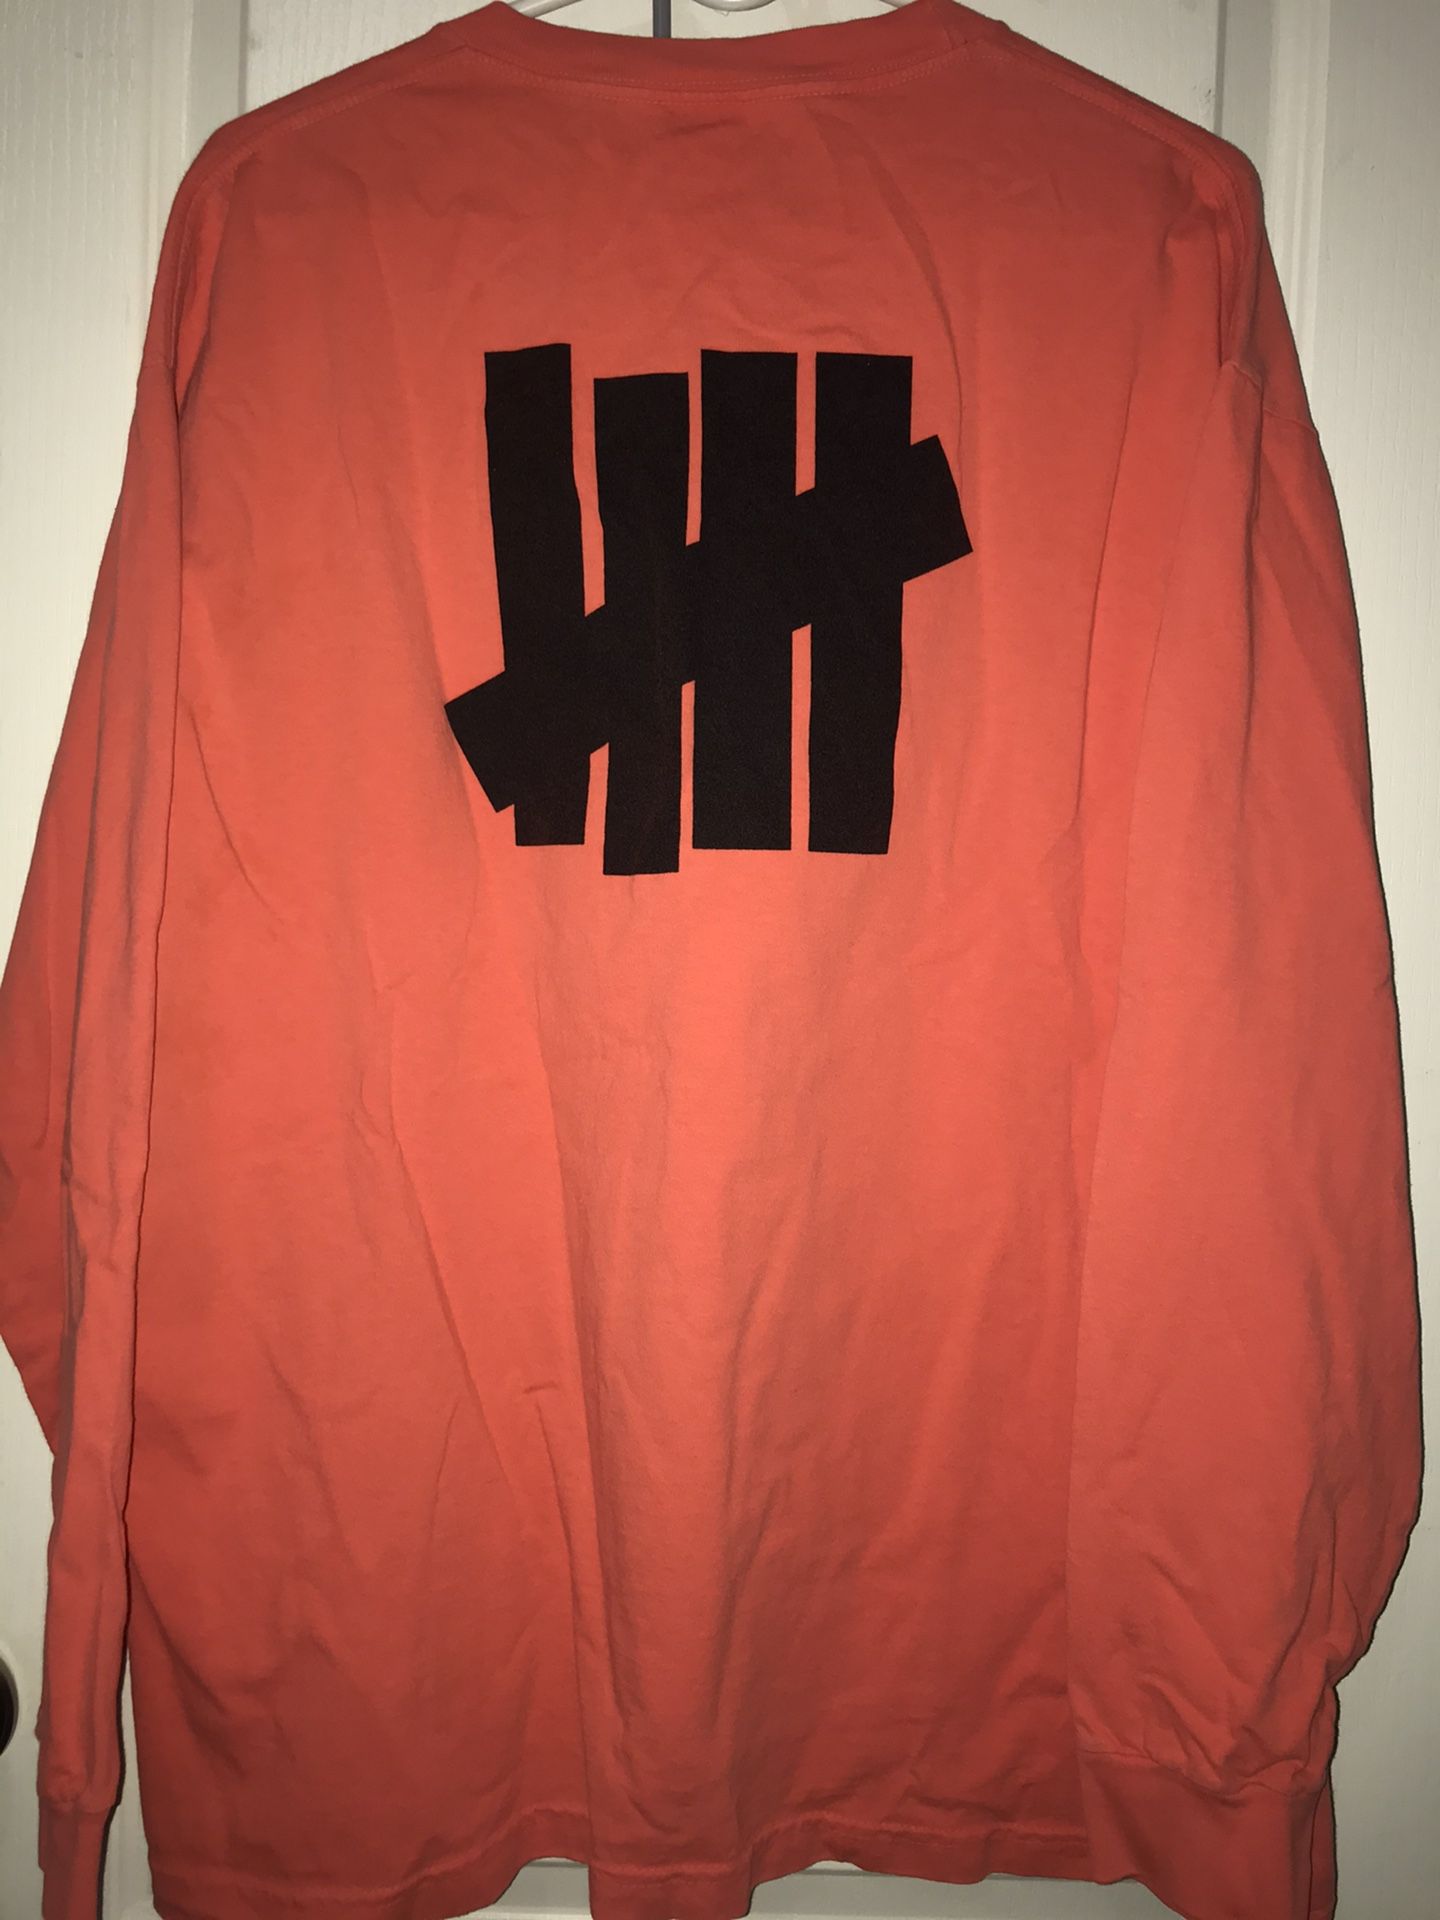 Undefeated long sleeve Men’s XL